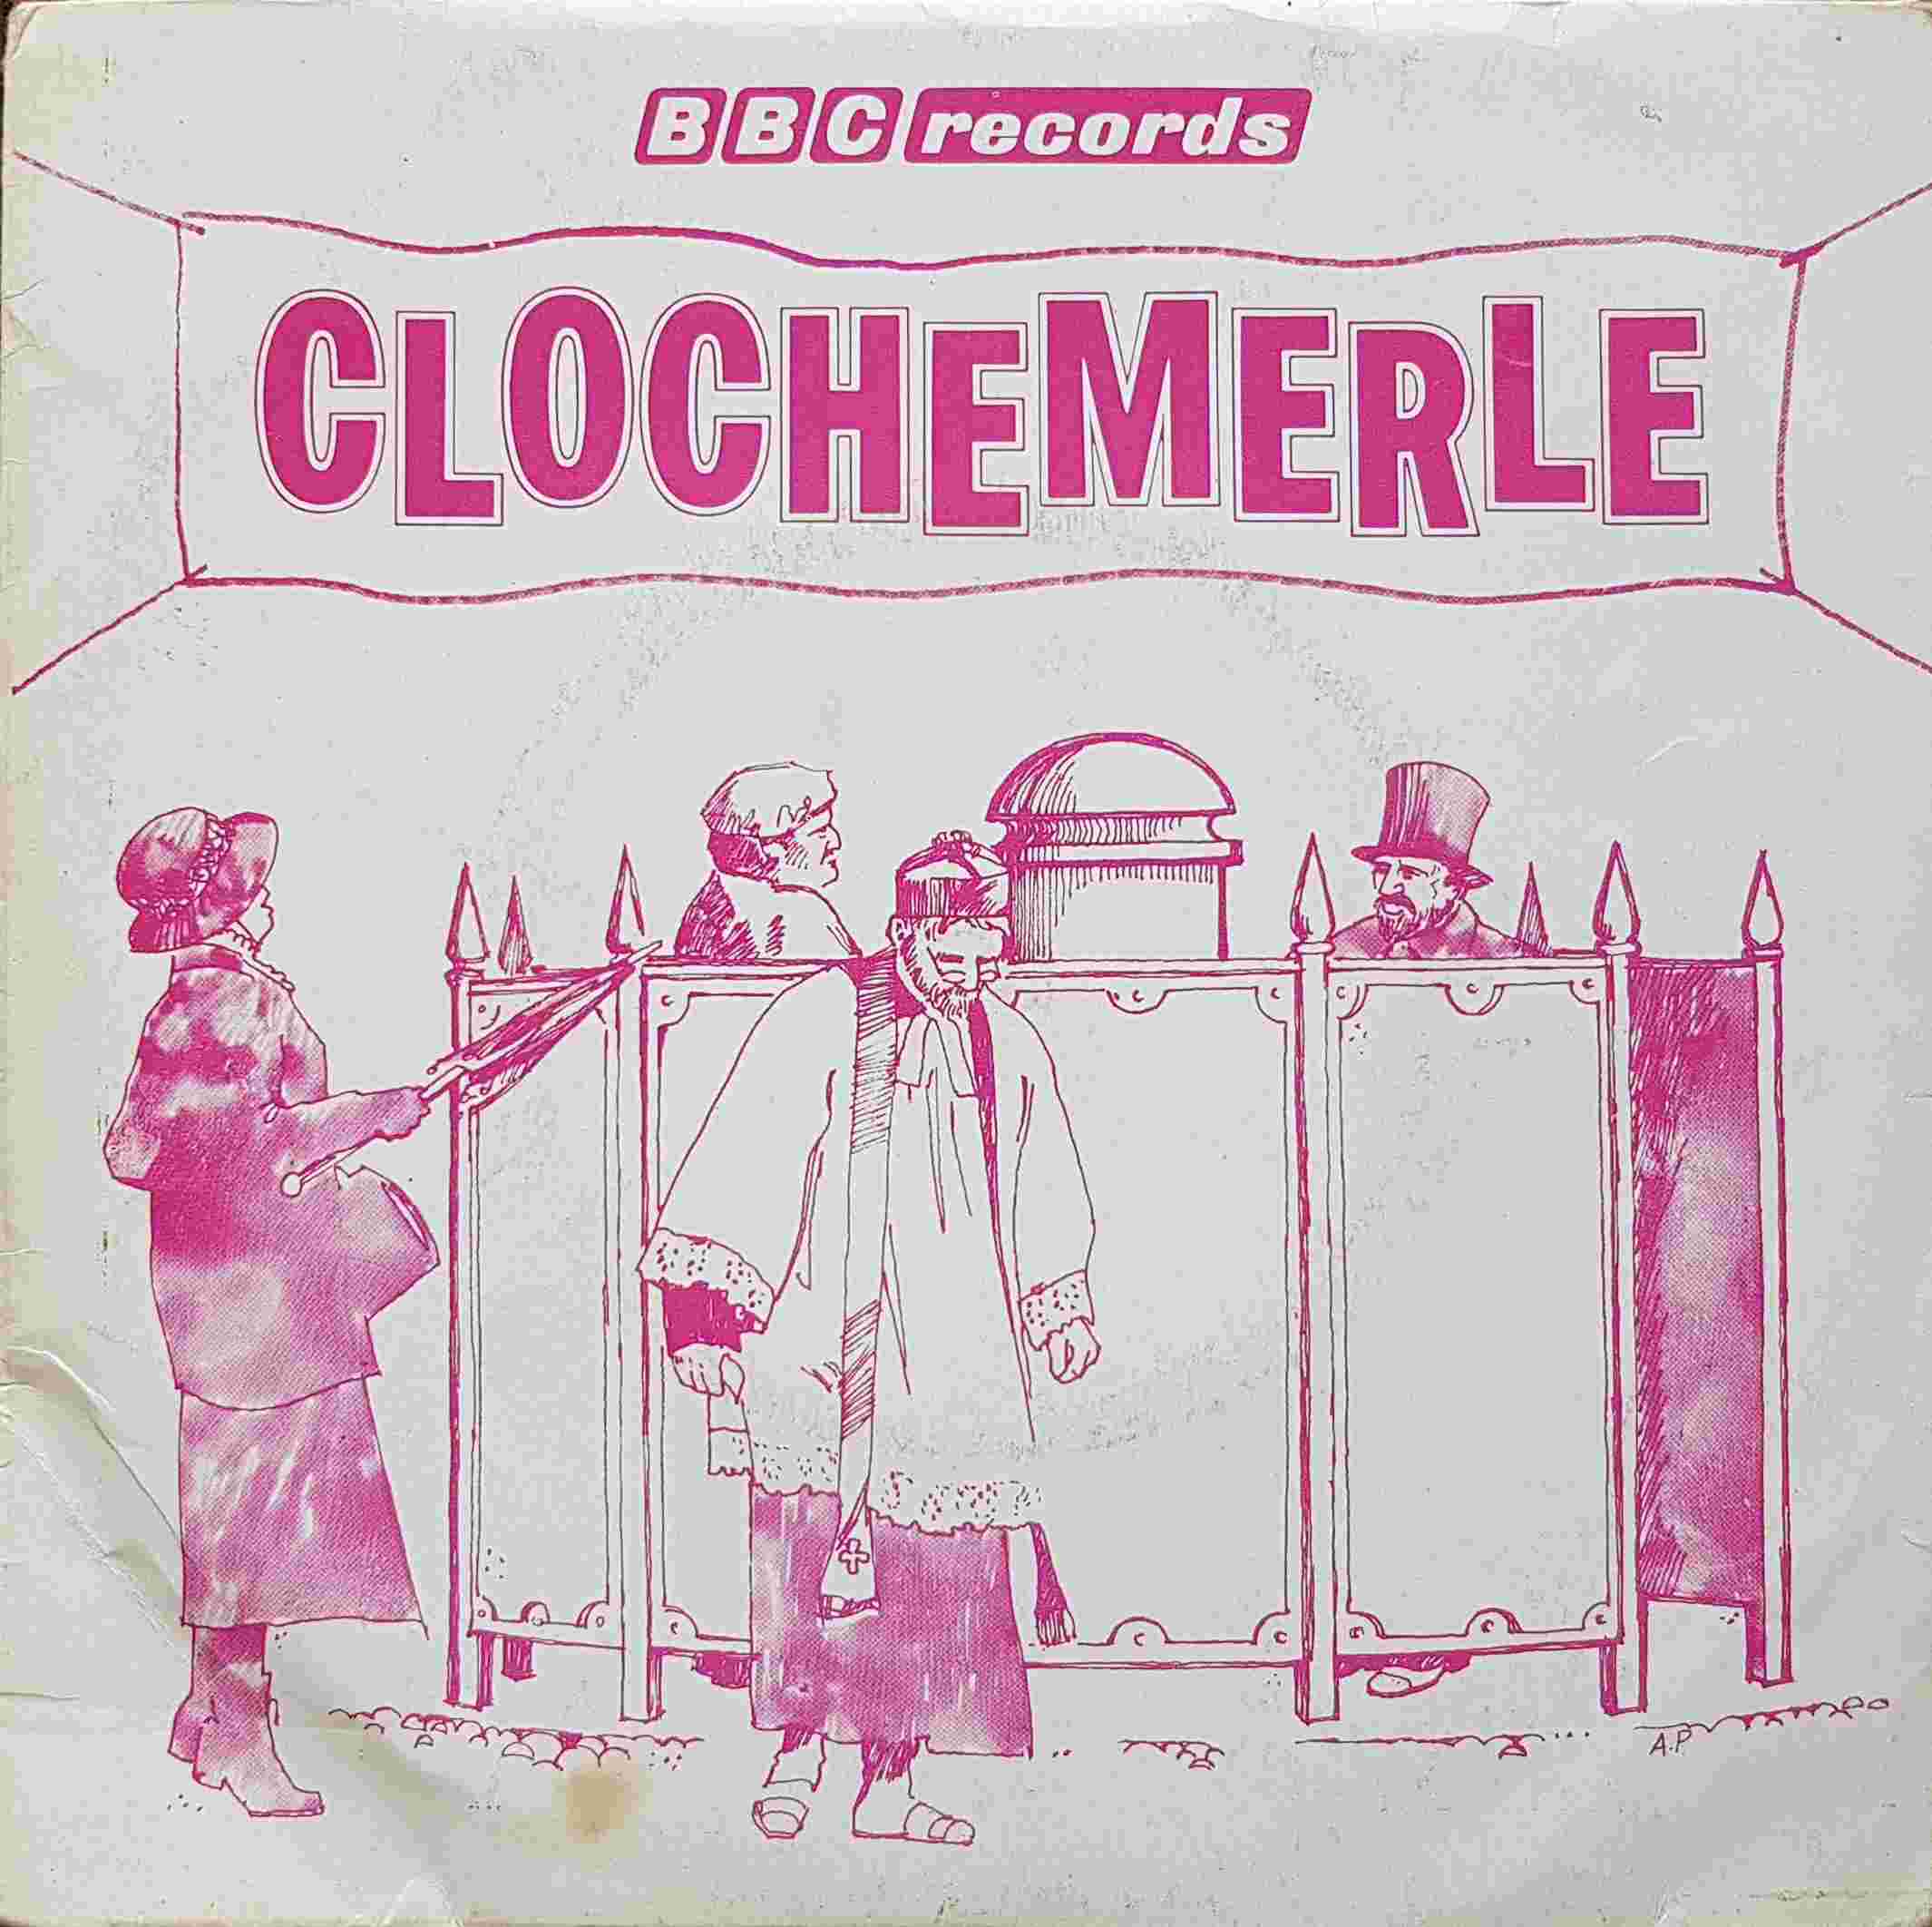 Picture of Clochemerle by artist Alan Roper from the BBC singles - Records and Tapes library